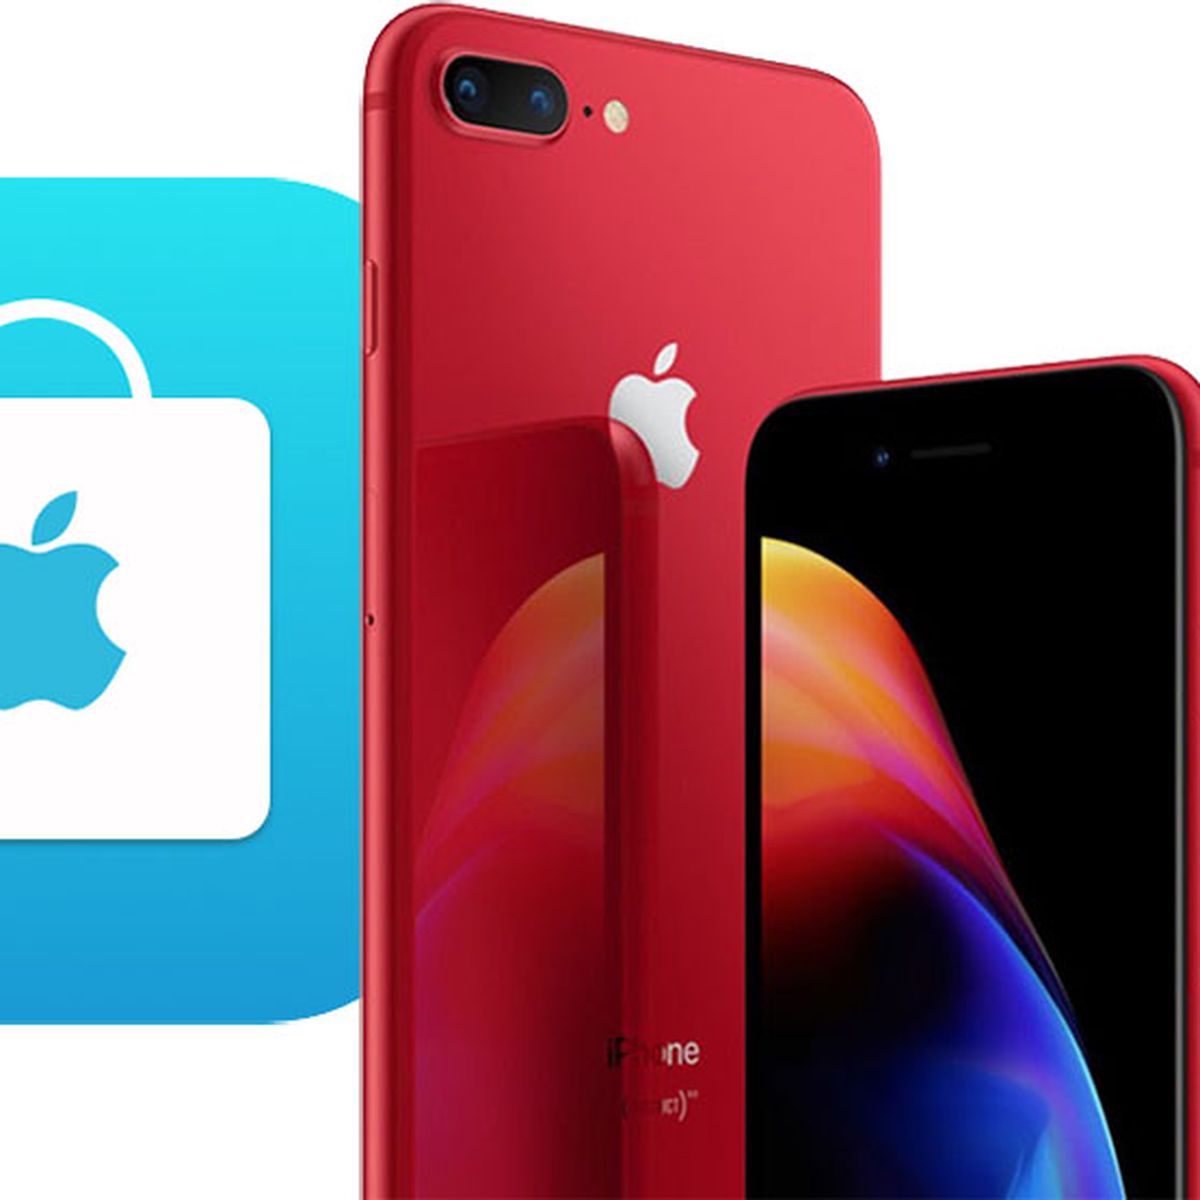 PRODUCT)RED iPhone 8 and iPhone 8 Plus Now Available for In-Store 